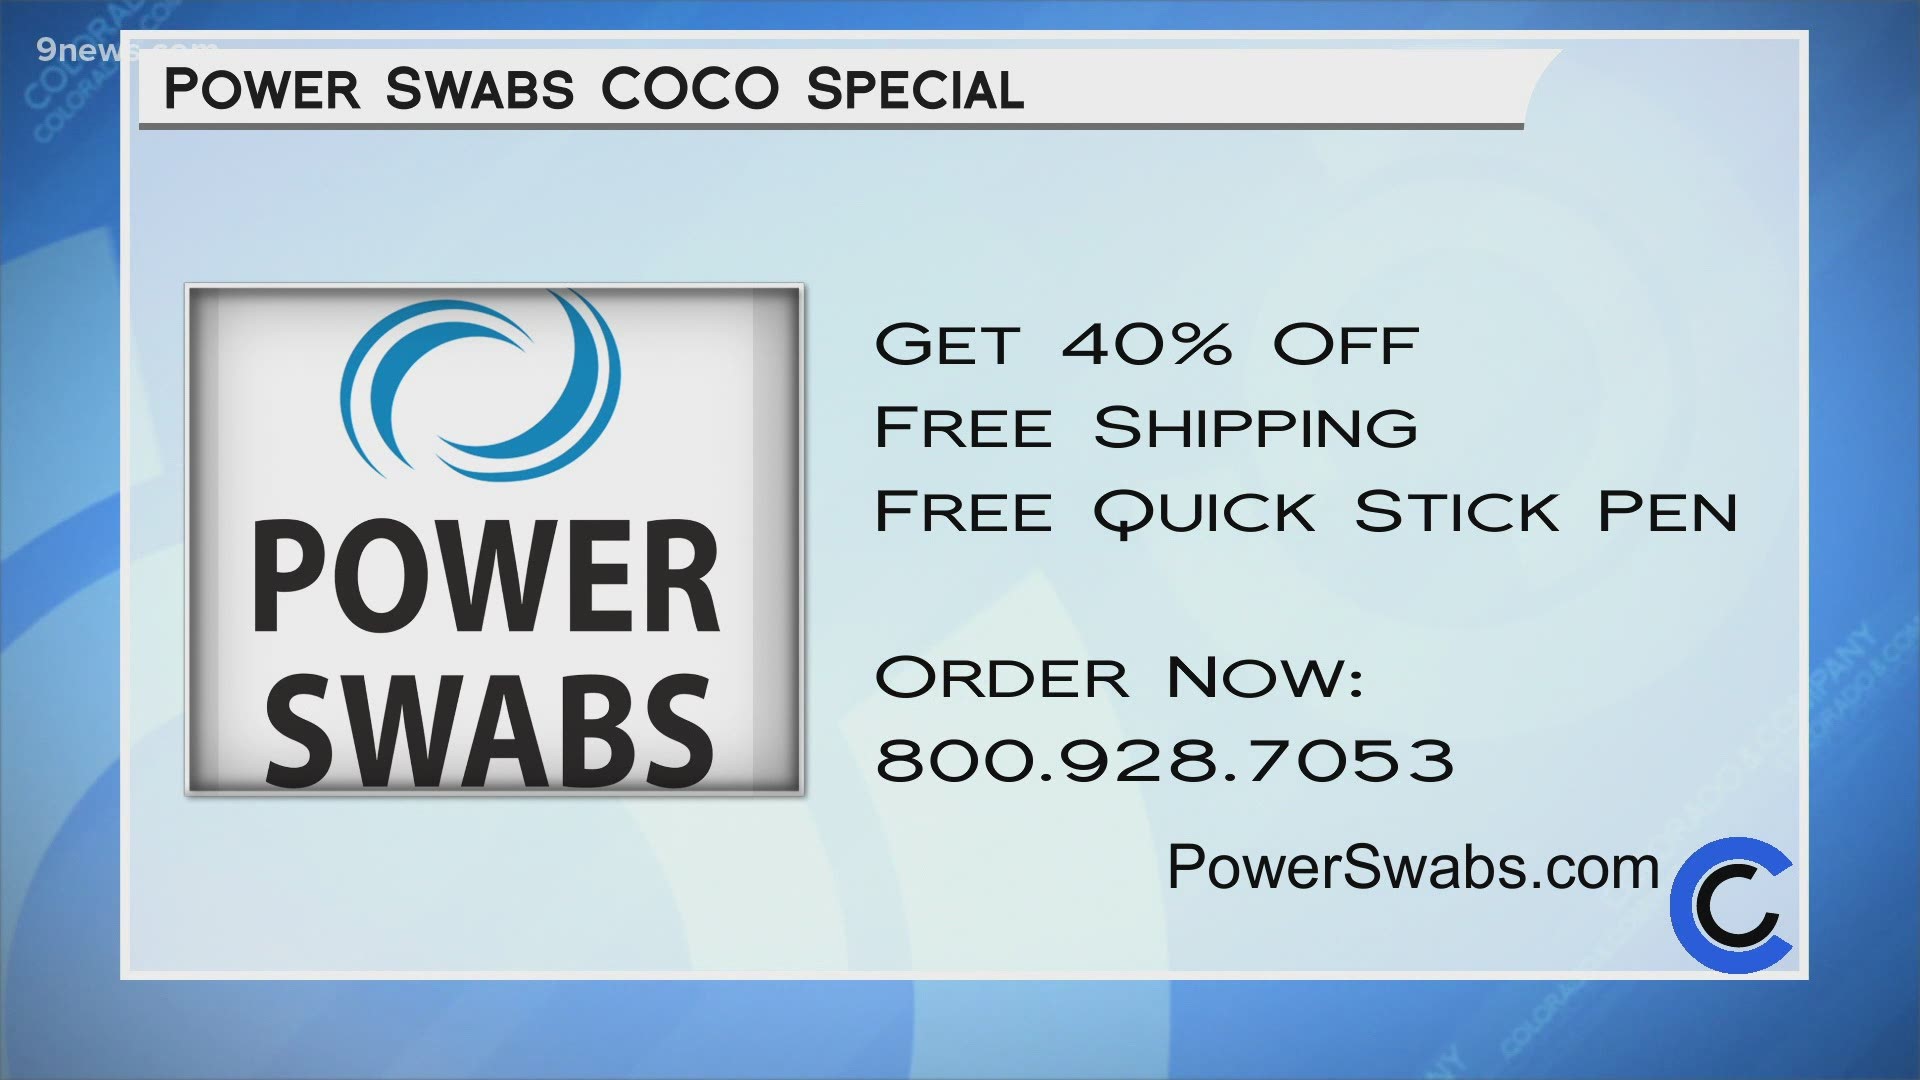 Call 800.928.7053 or visit PowerSwabs.com to order yours today. Right now you can get it for 40% off, free shipping and a free Quick Stick with your order!